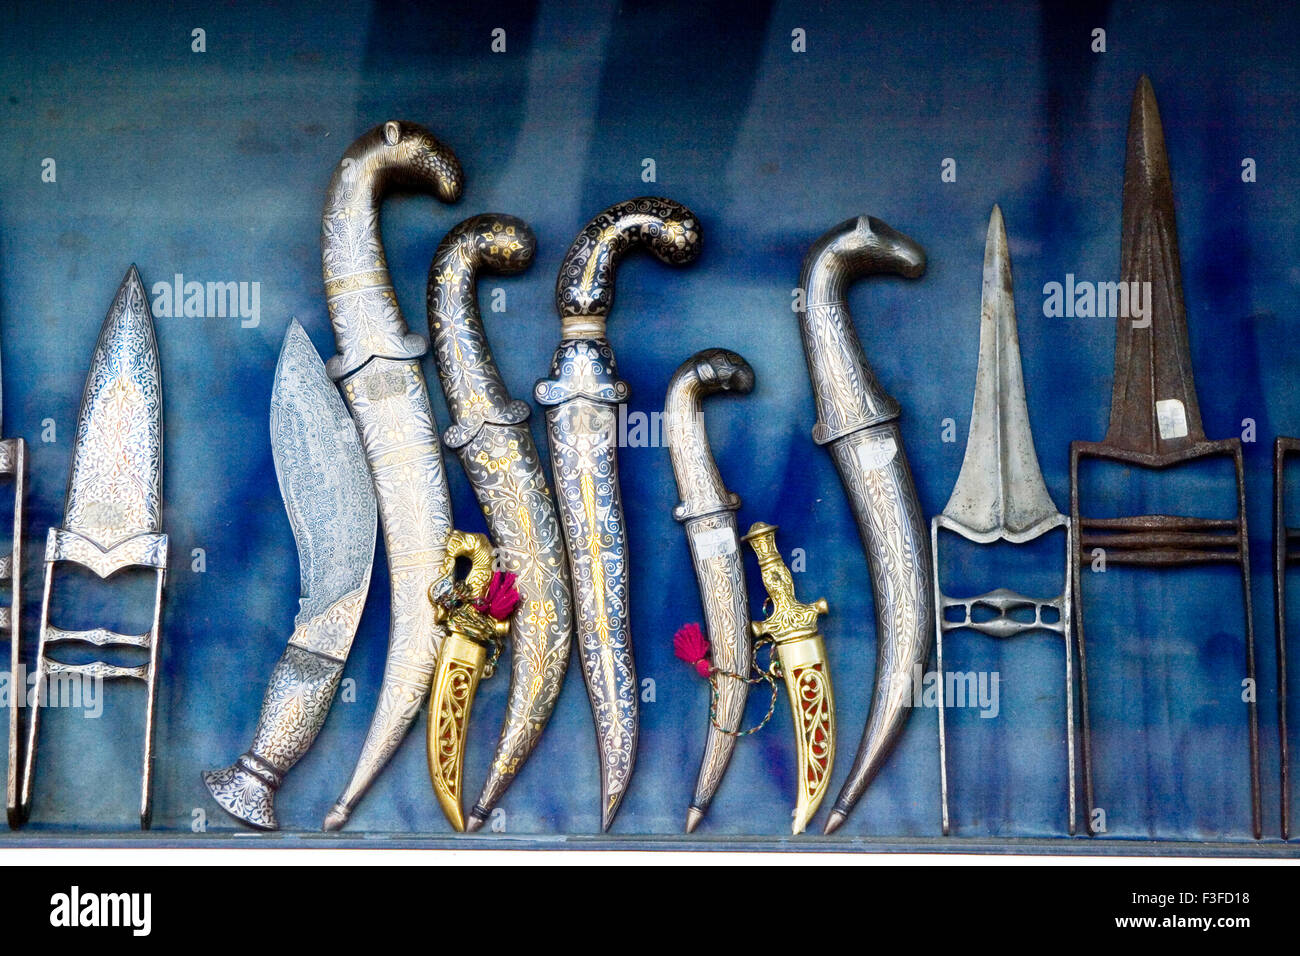 War weapons, Udaipur, Rajasthan, India, Asia Stock Photo